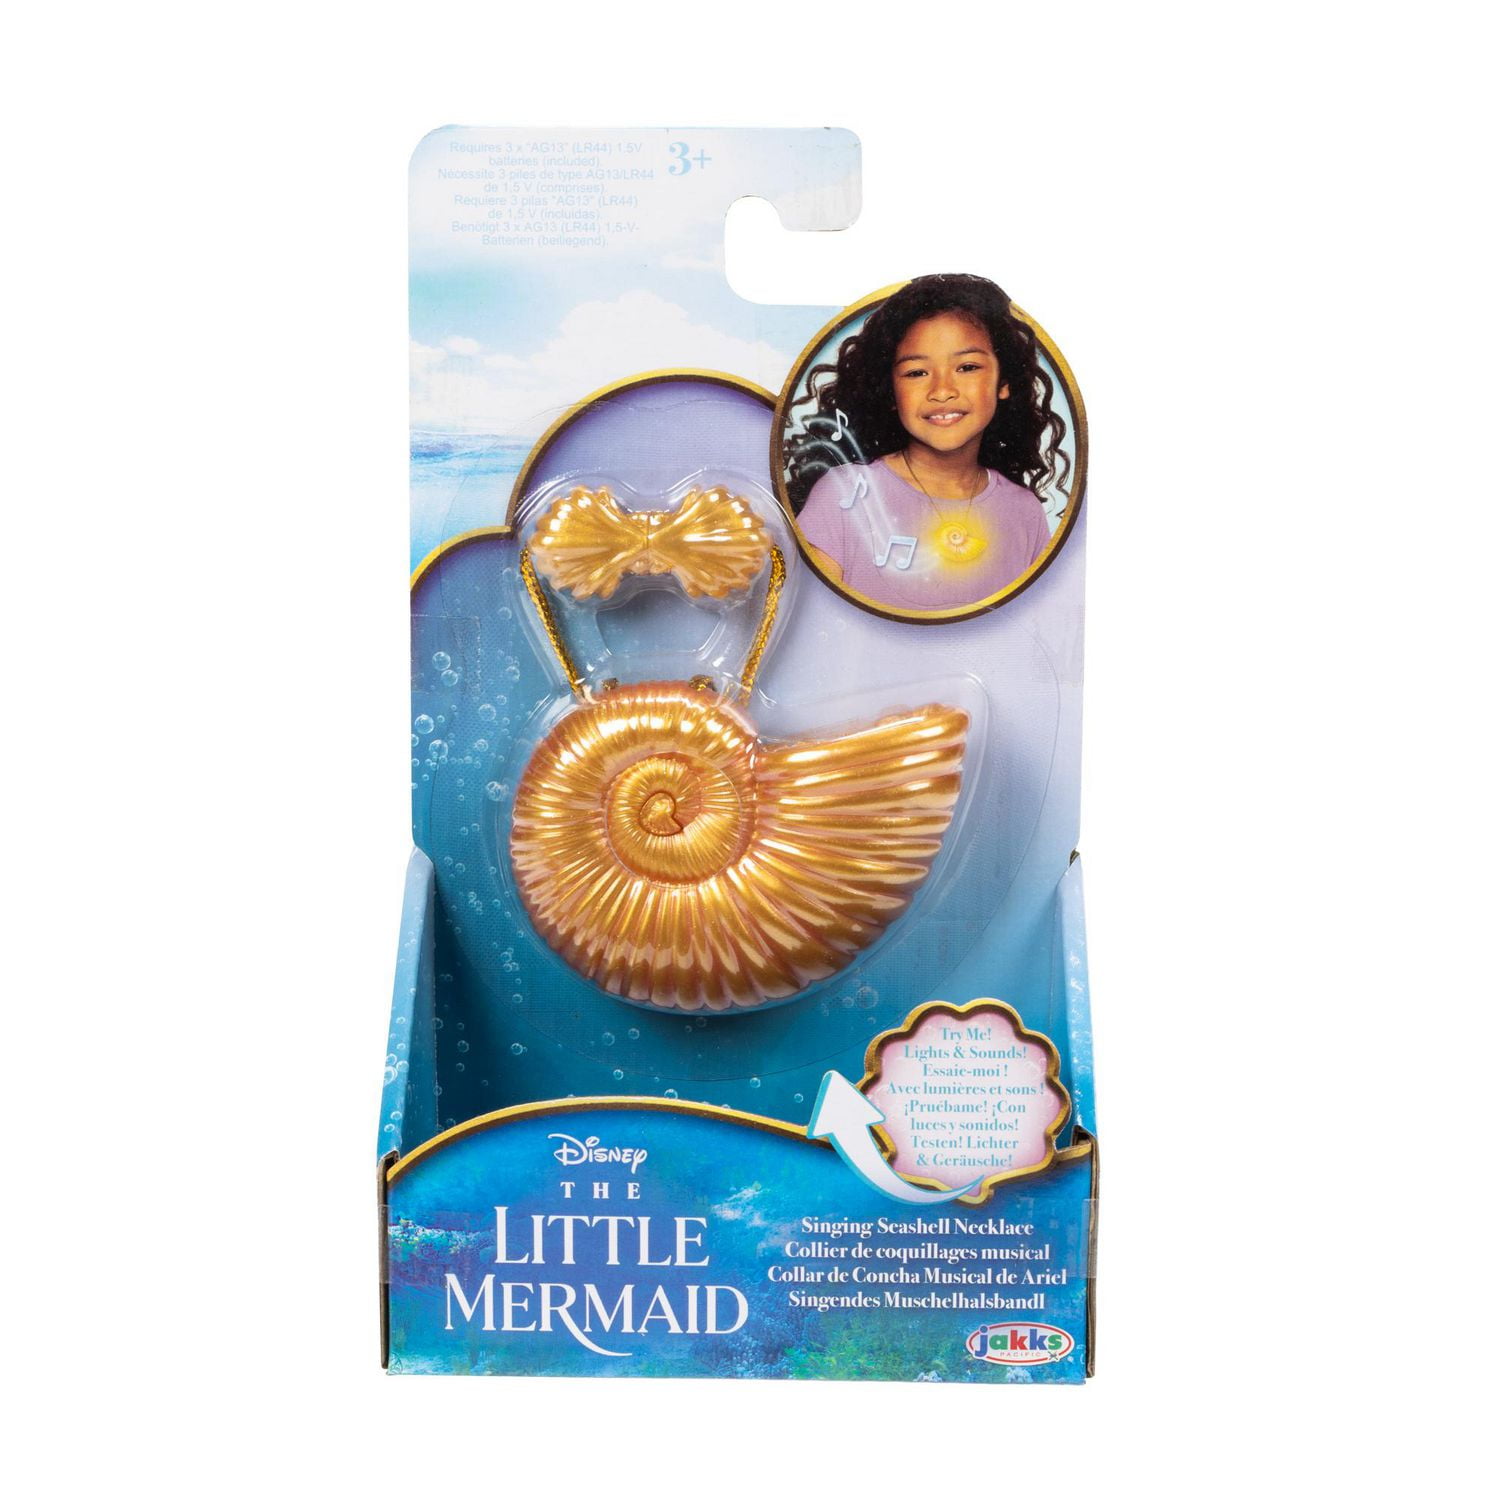 Disney's Little Mermaid Live Action - Singing Seashell Necklace